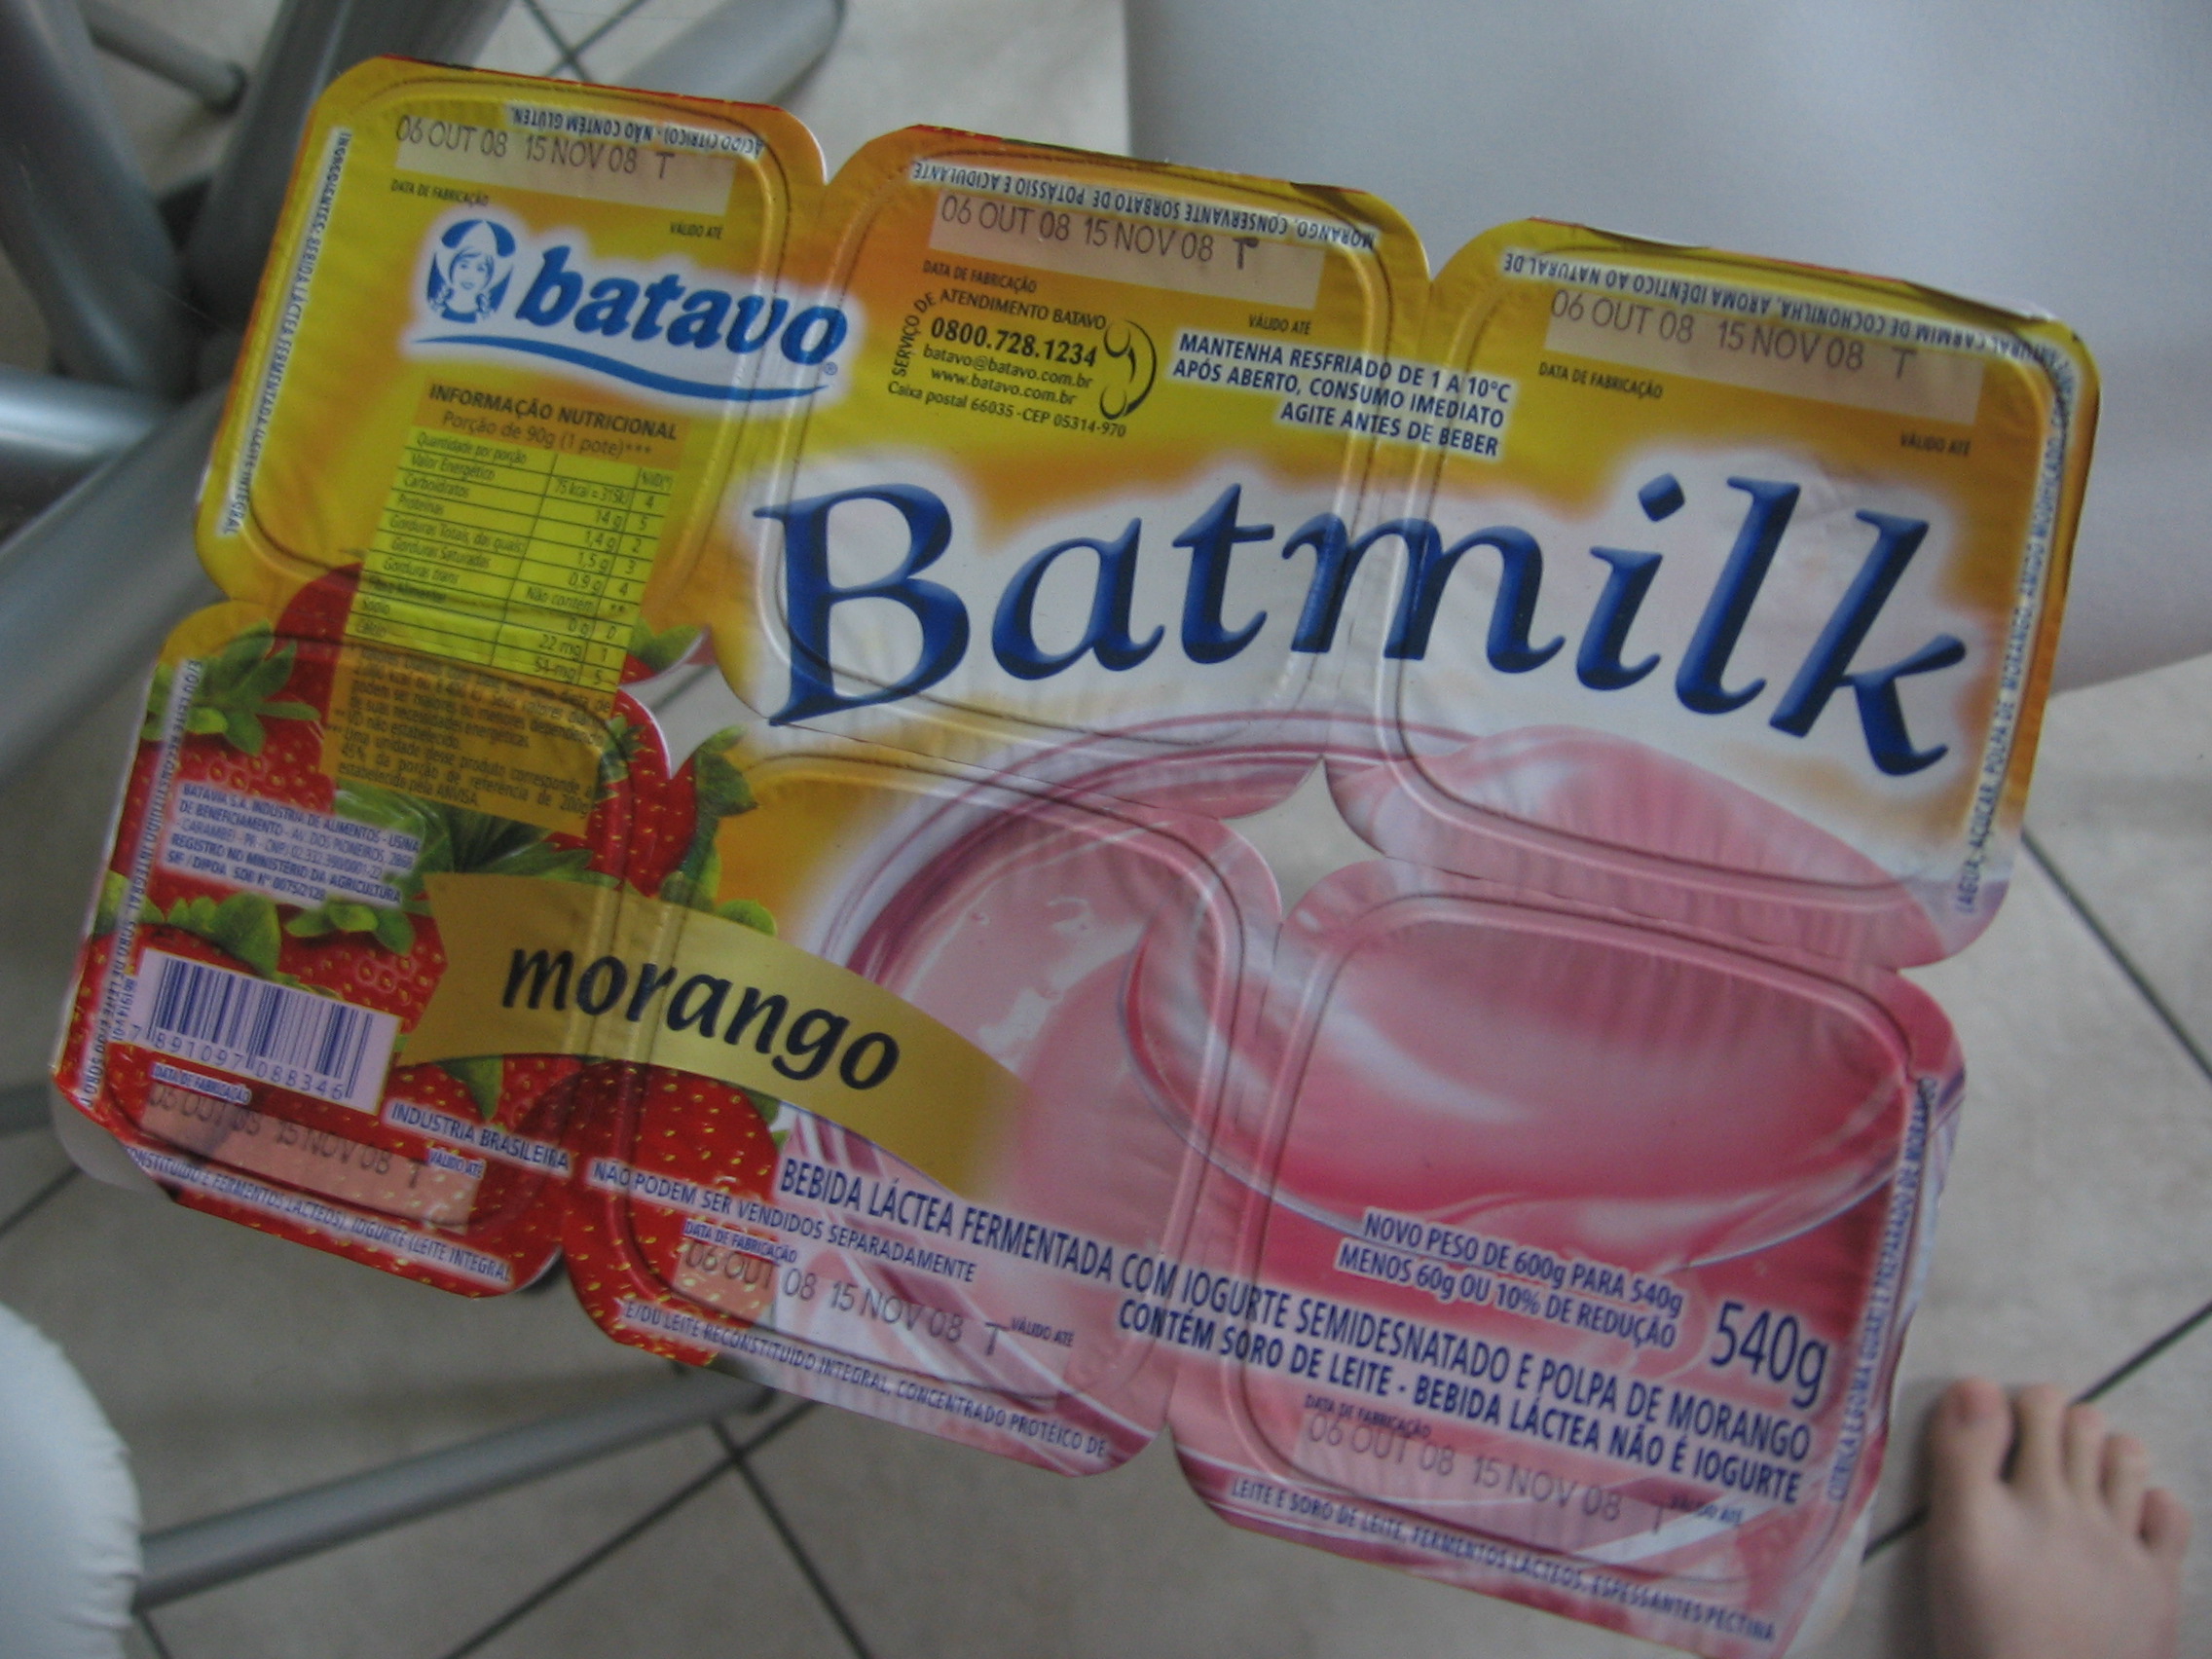 after the cow-milk, rat-milk, there is the Bat-milk yogurt
they now are selling everything O.o